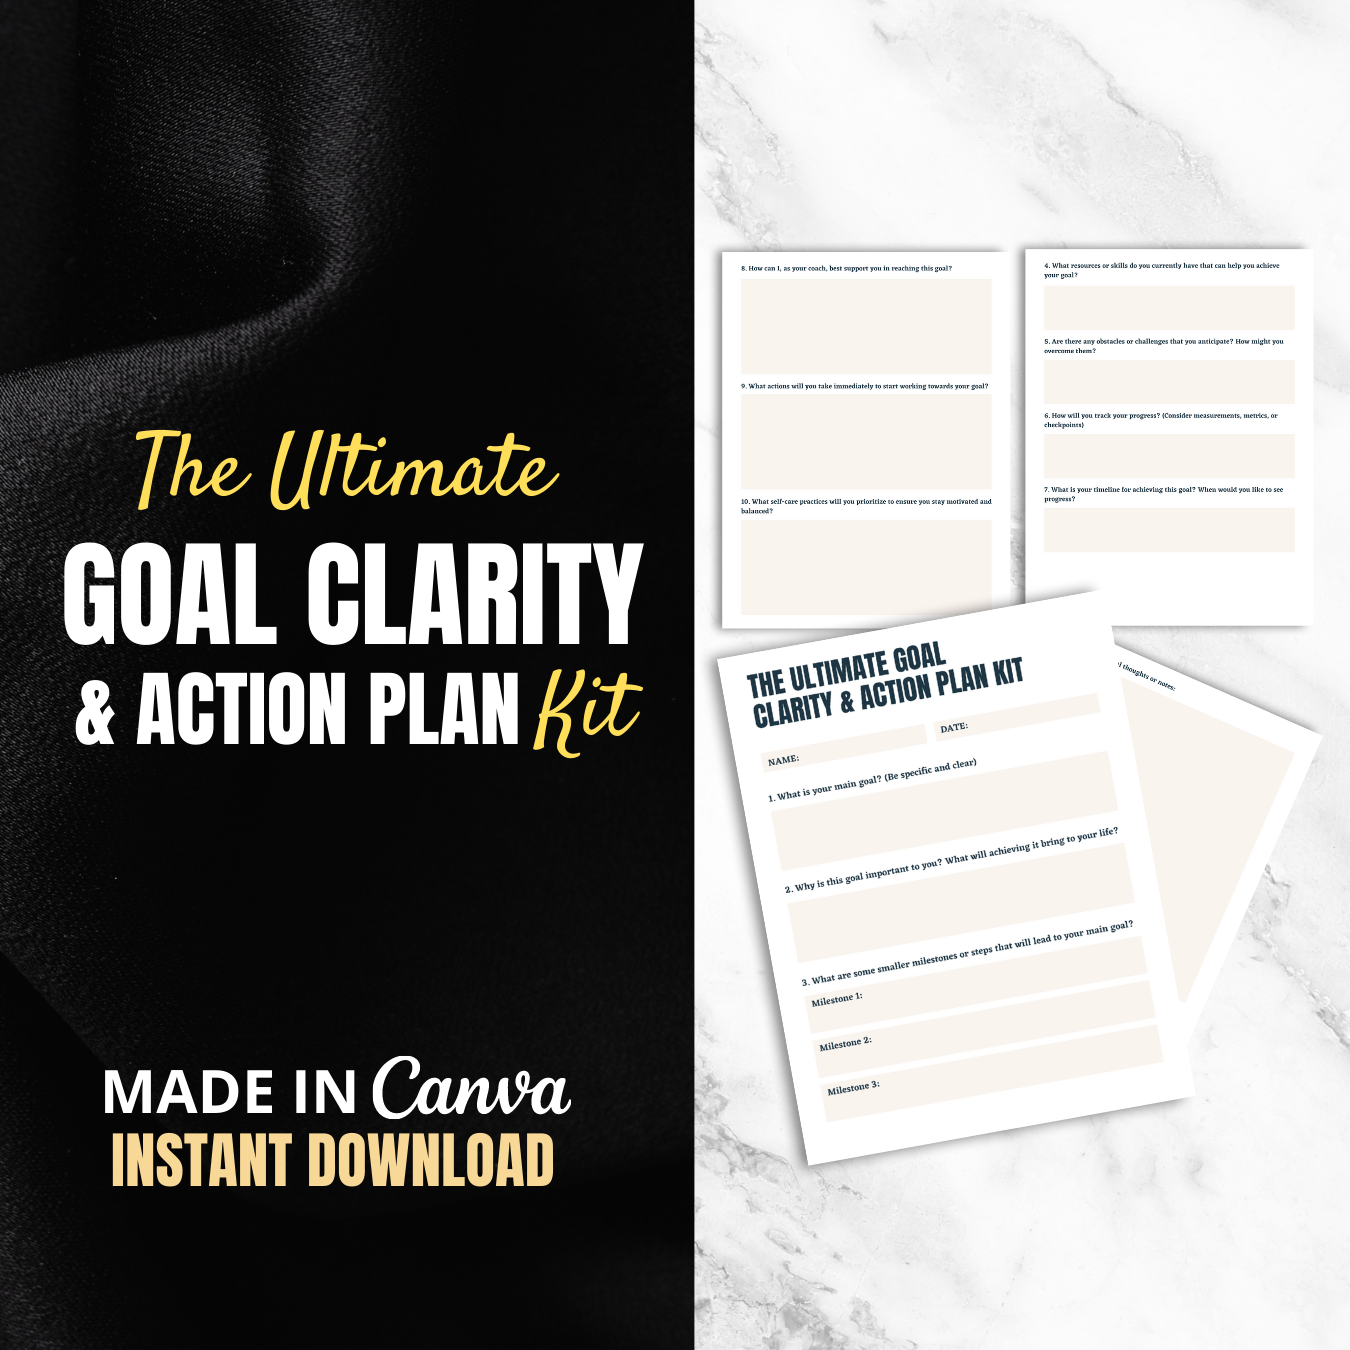 The Ultimate Goal Clarity & Action Plan Kit